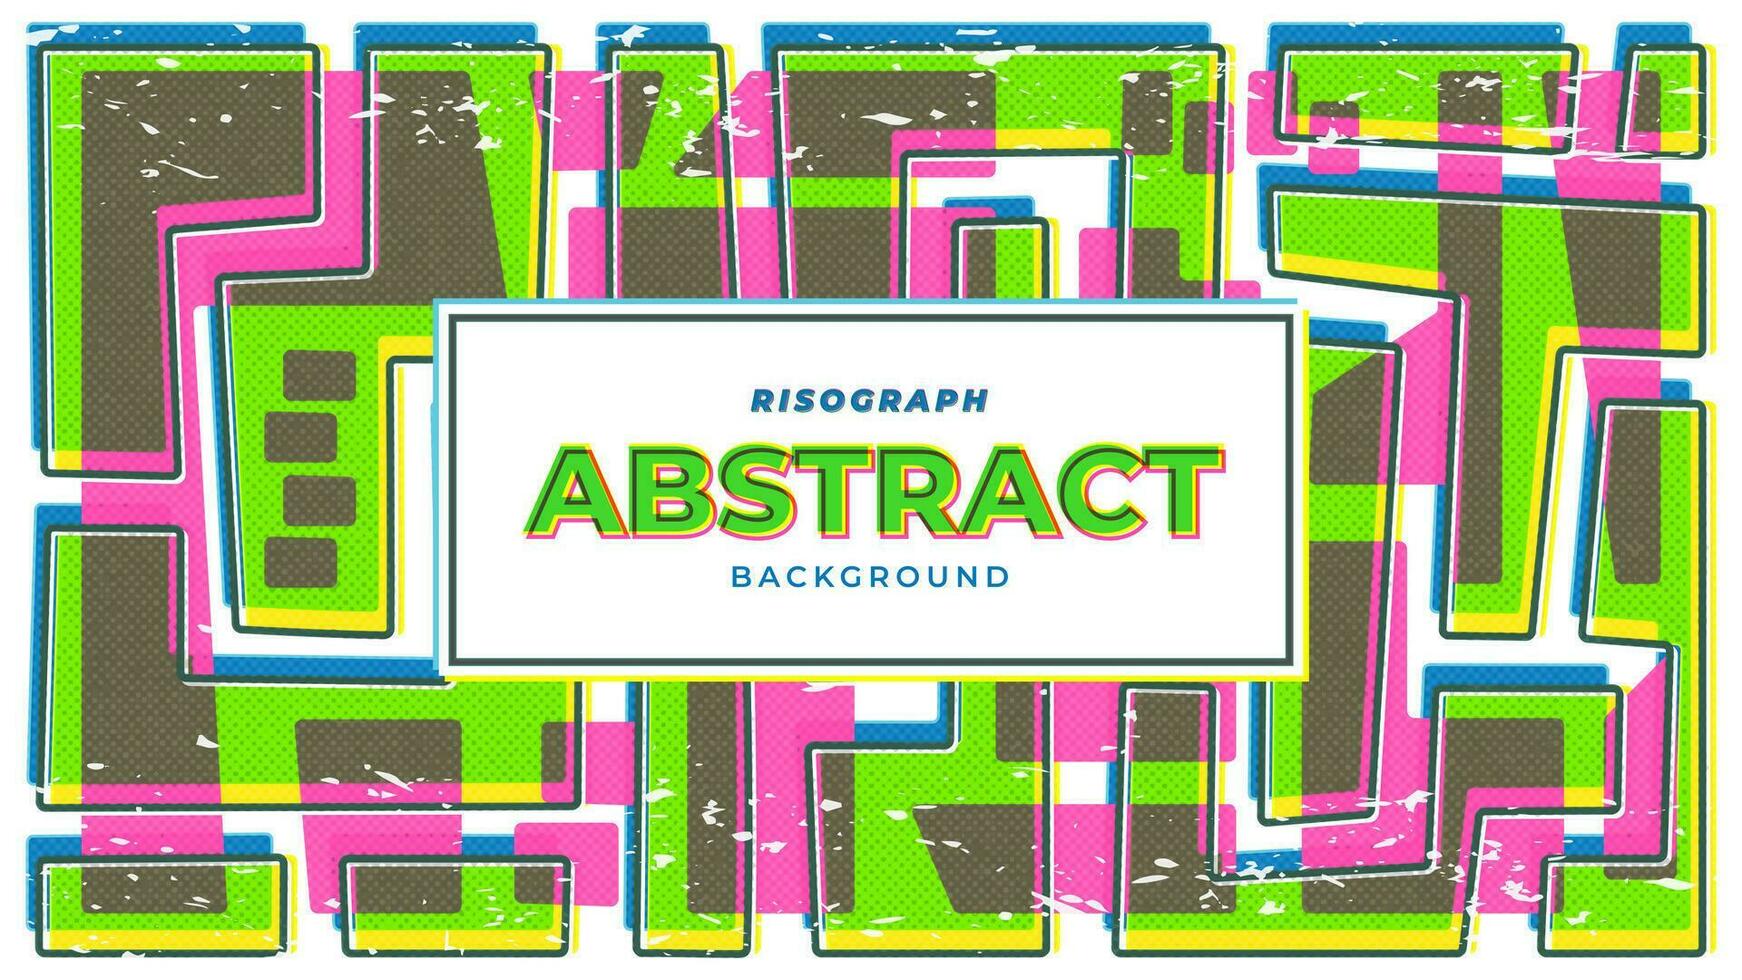 Abstract Blocks Background with Risograph Style vector